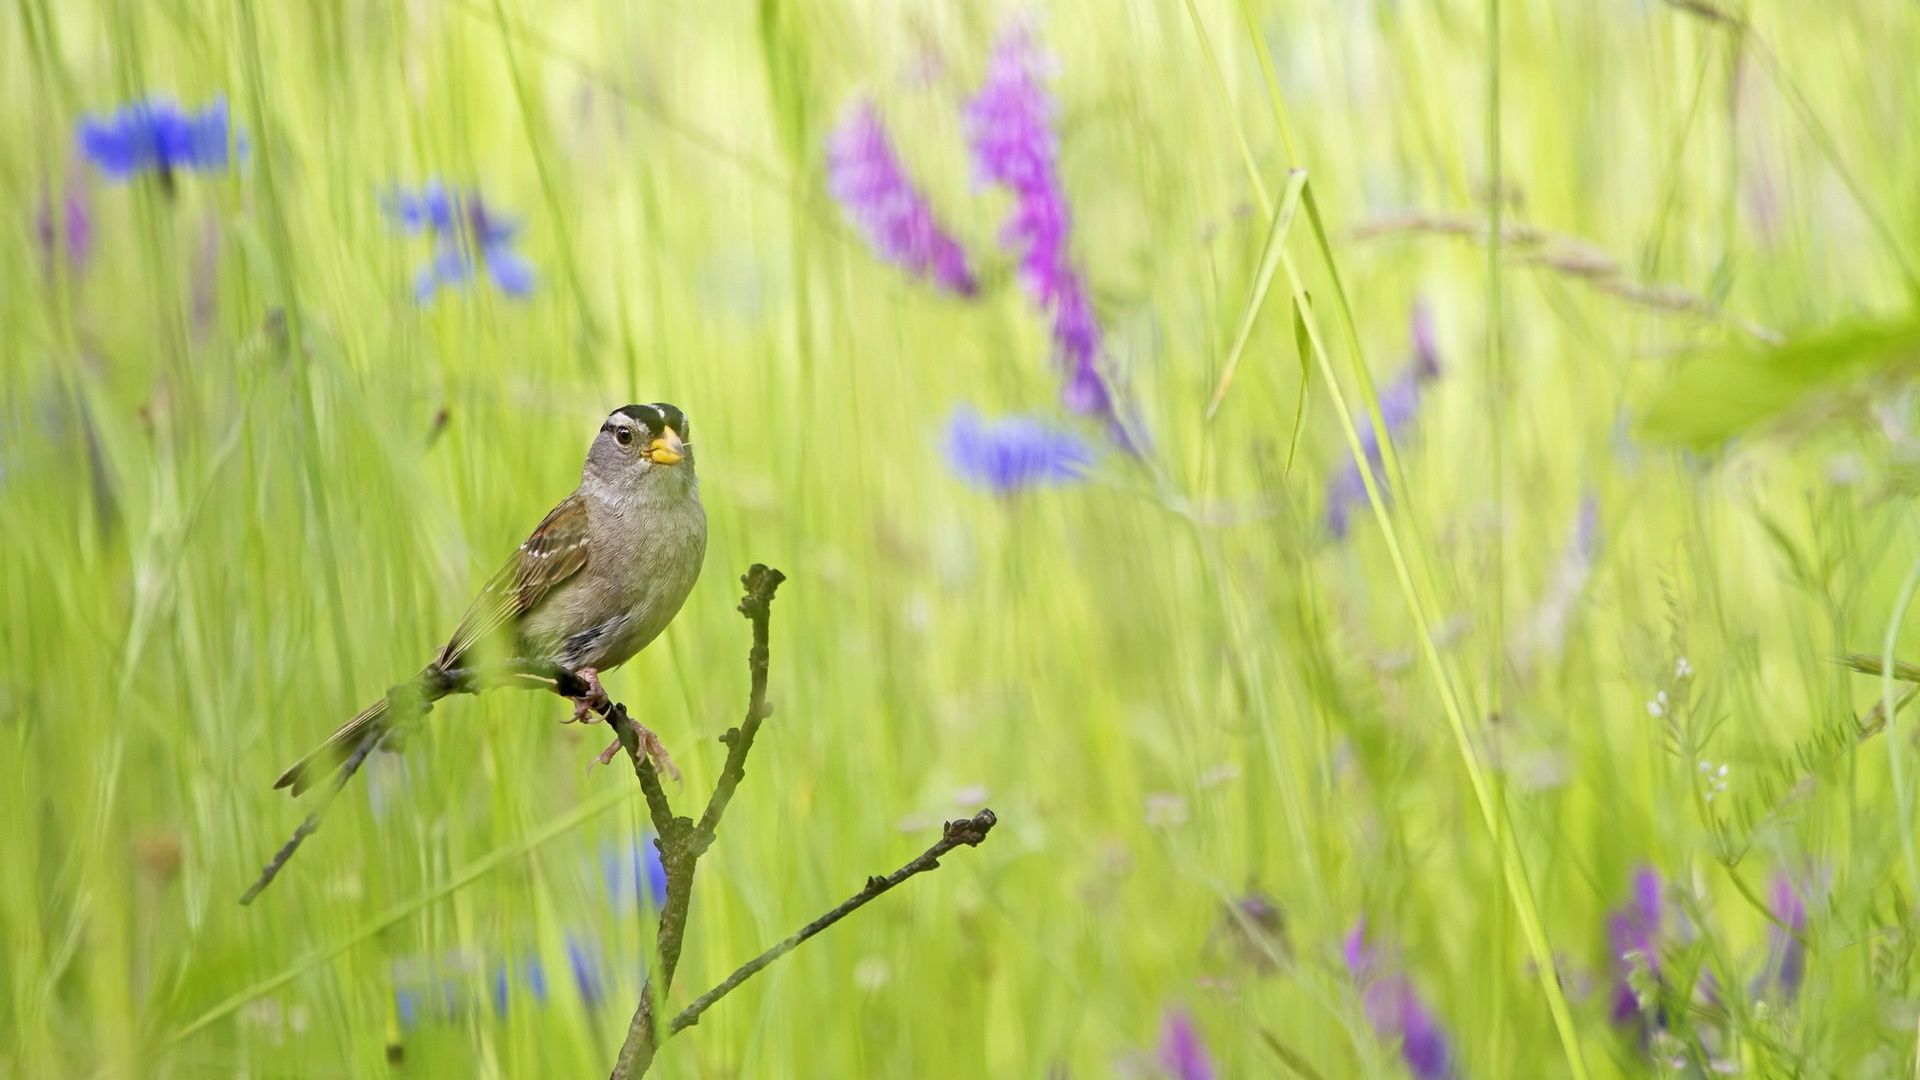 Wallpaper Summer bird in the grass 1920x1200 HD Picture, Image